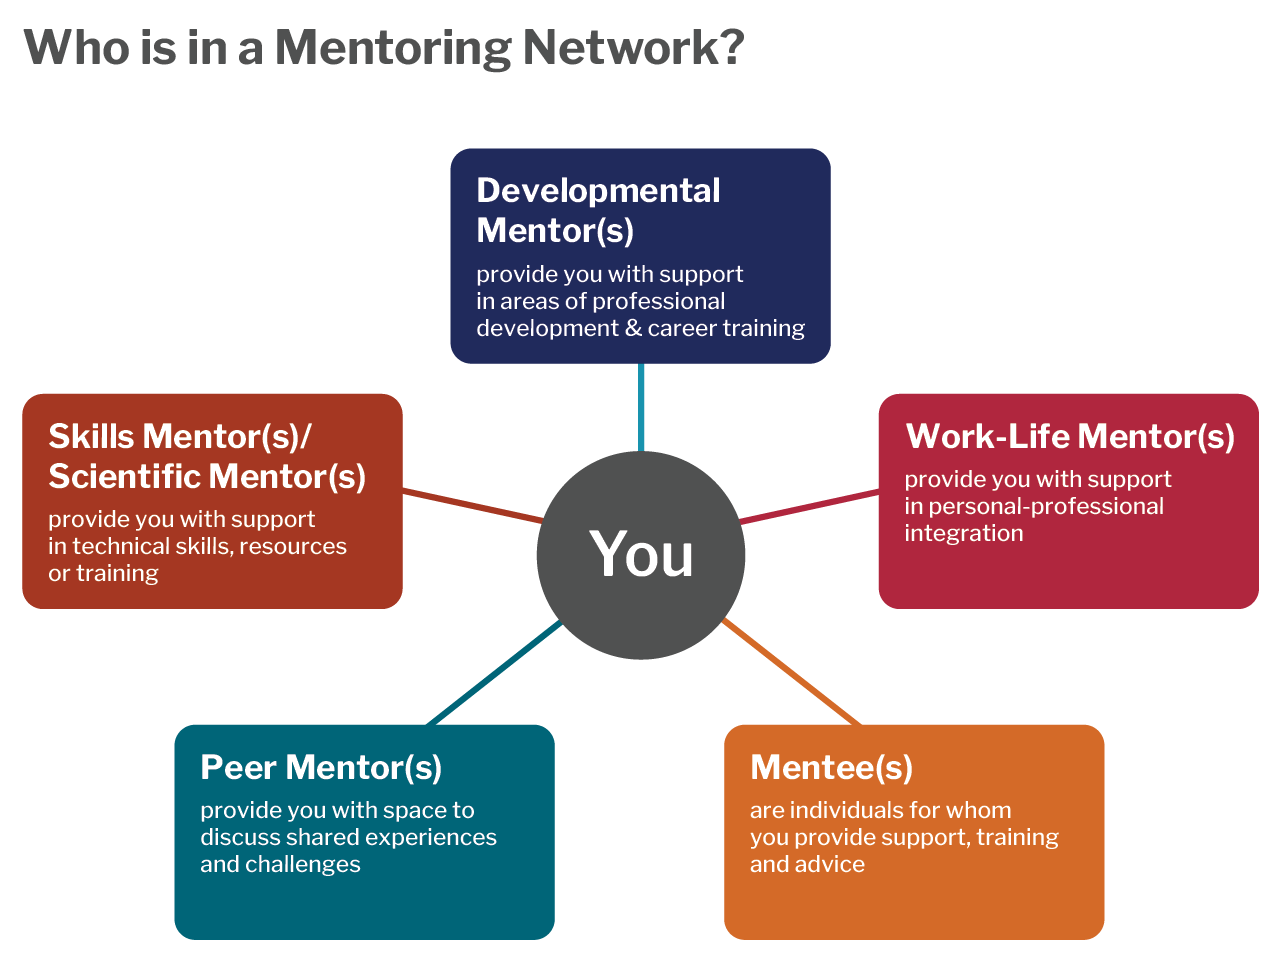 Who is in a mentoring network? You in the middle are connected to developmental mentors, skills mentor(s)/scientific mentor(s), Work-life mentor(s), Peer mentor(s), and Mentee(s). 